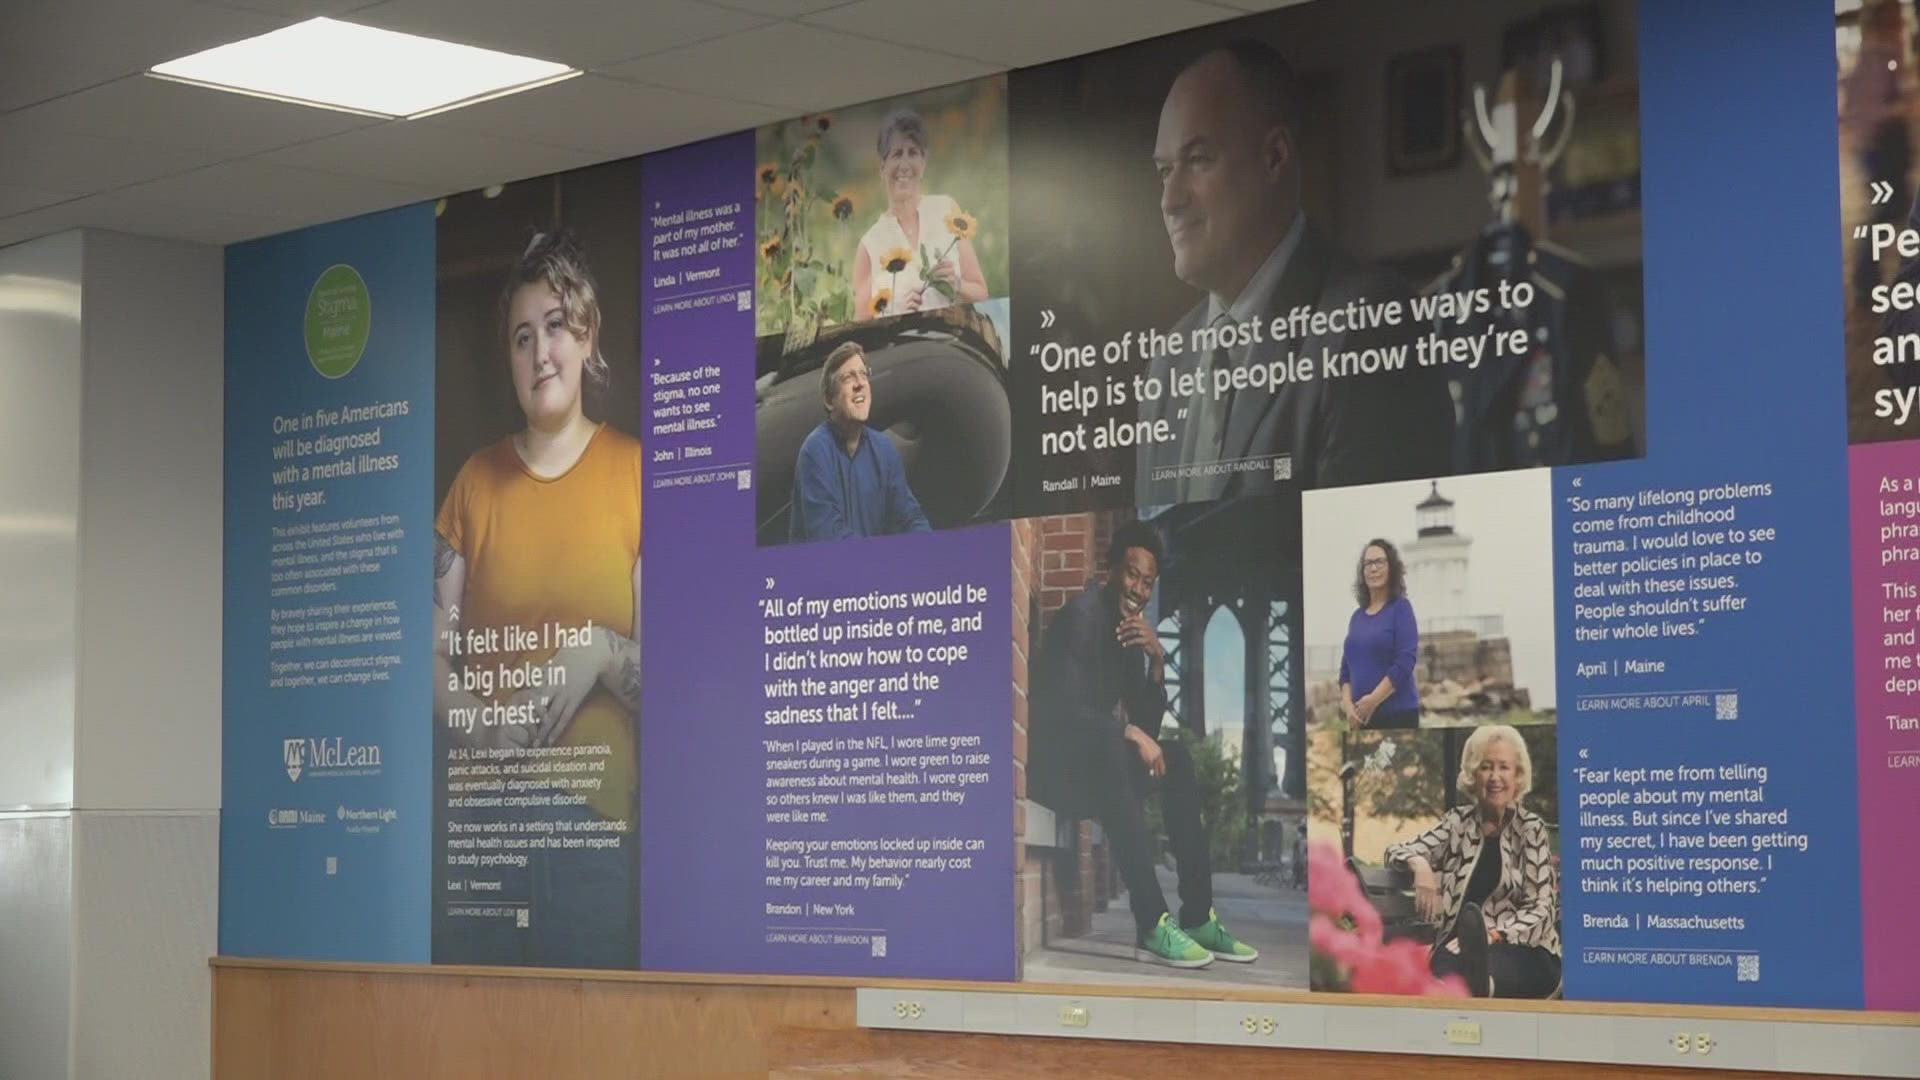 The "Deconstructing Stigma" walls are in two different locations in the airport.